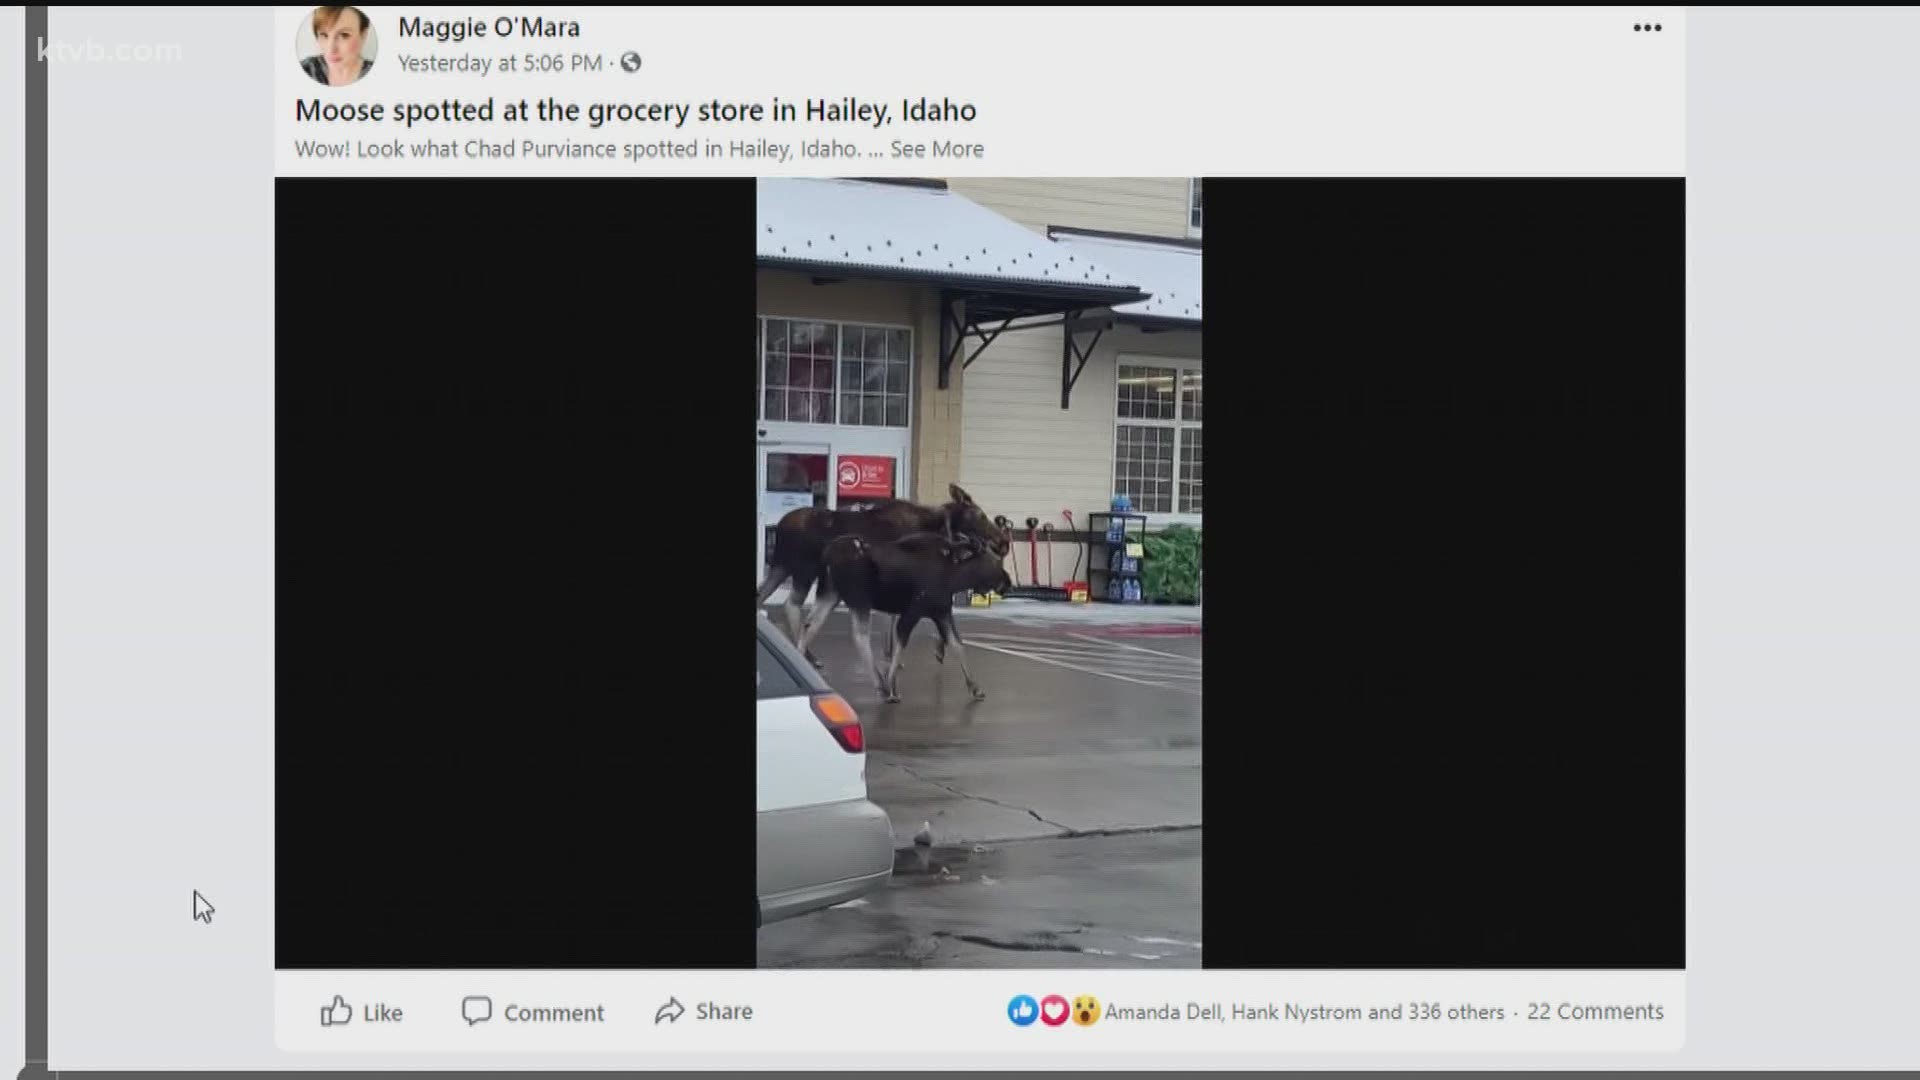 Chad Purviance spotted a couple of moose strolling by an Albertsons in Hailey, Idaho.